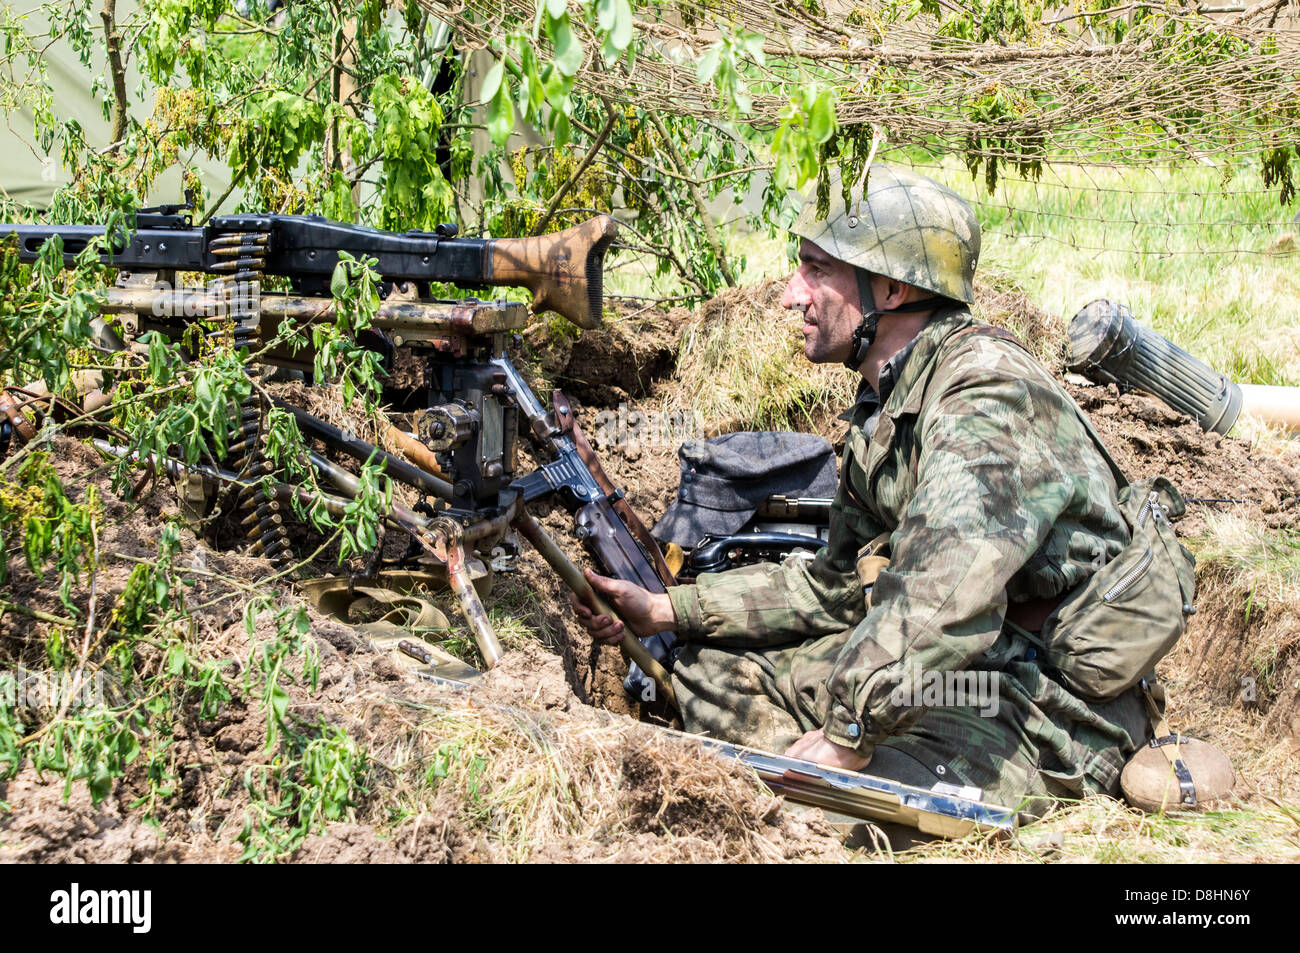 Overlord, D-Day re-enactment at Denmead 2013. German machine gunner in a trench hidden behind camouflage. Stock Photo